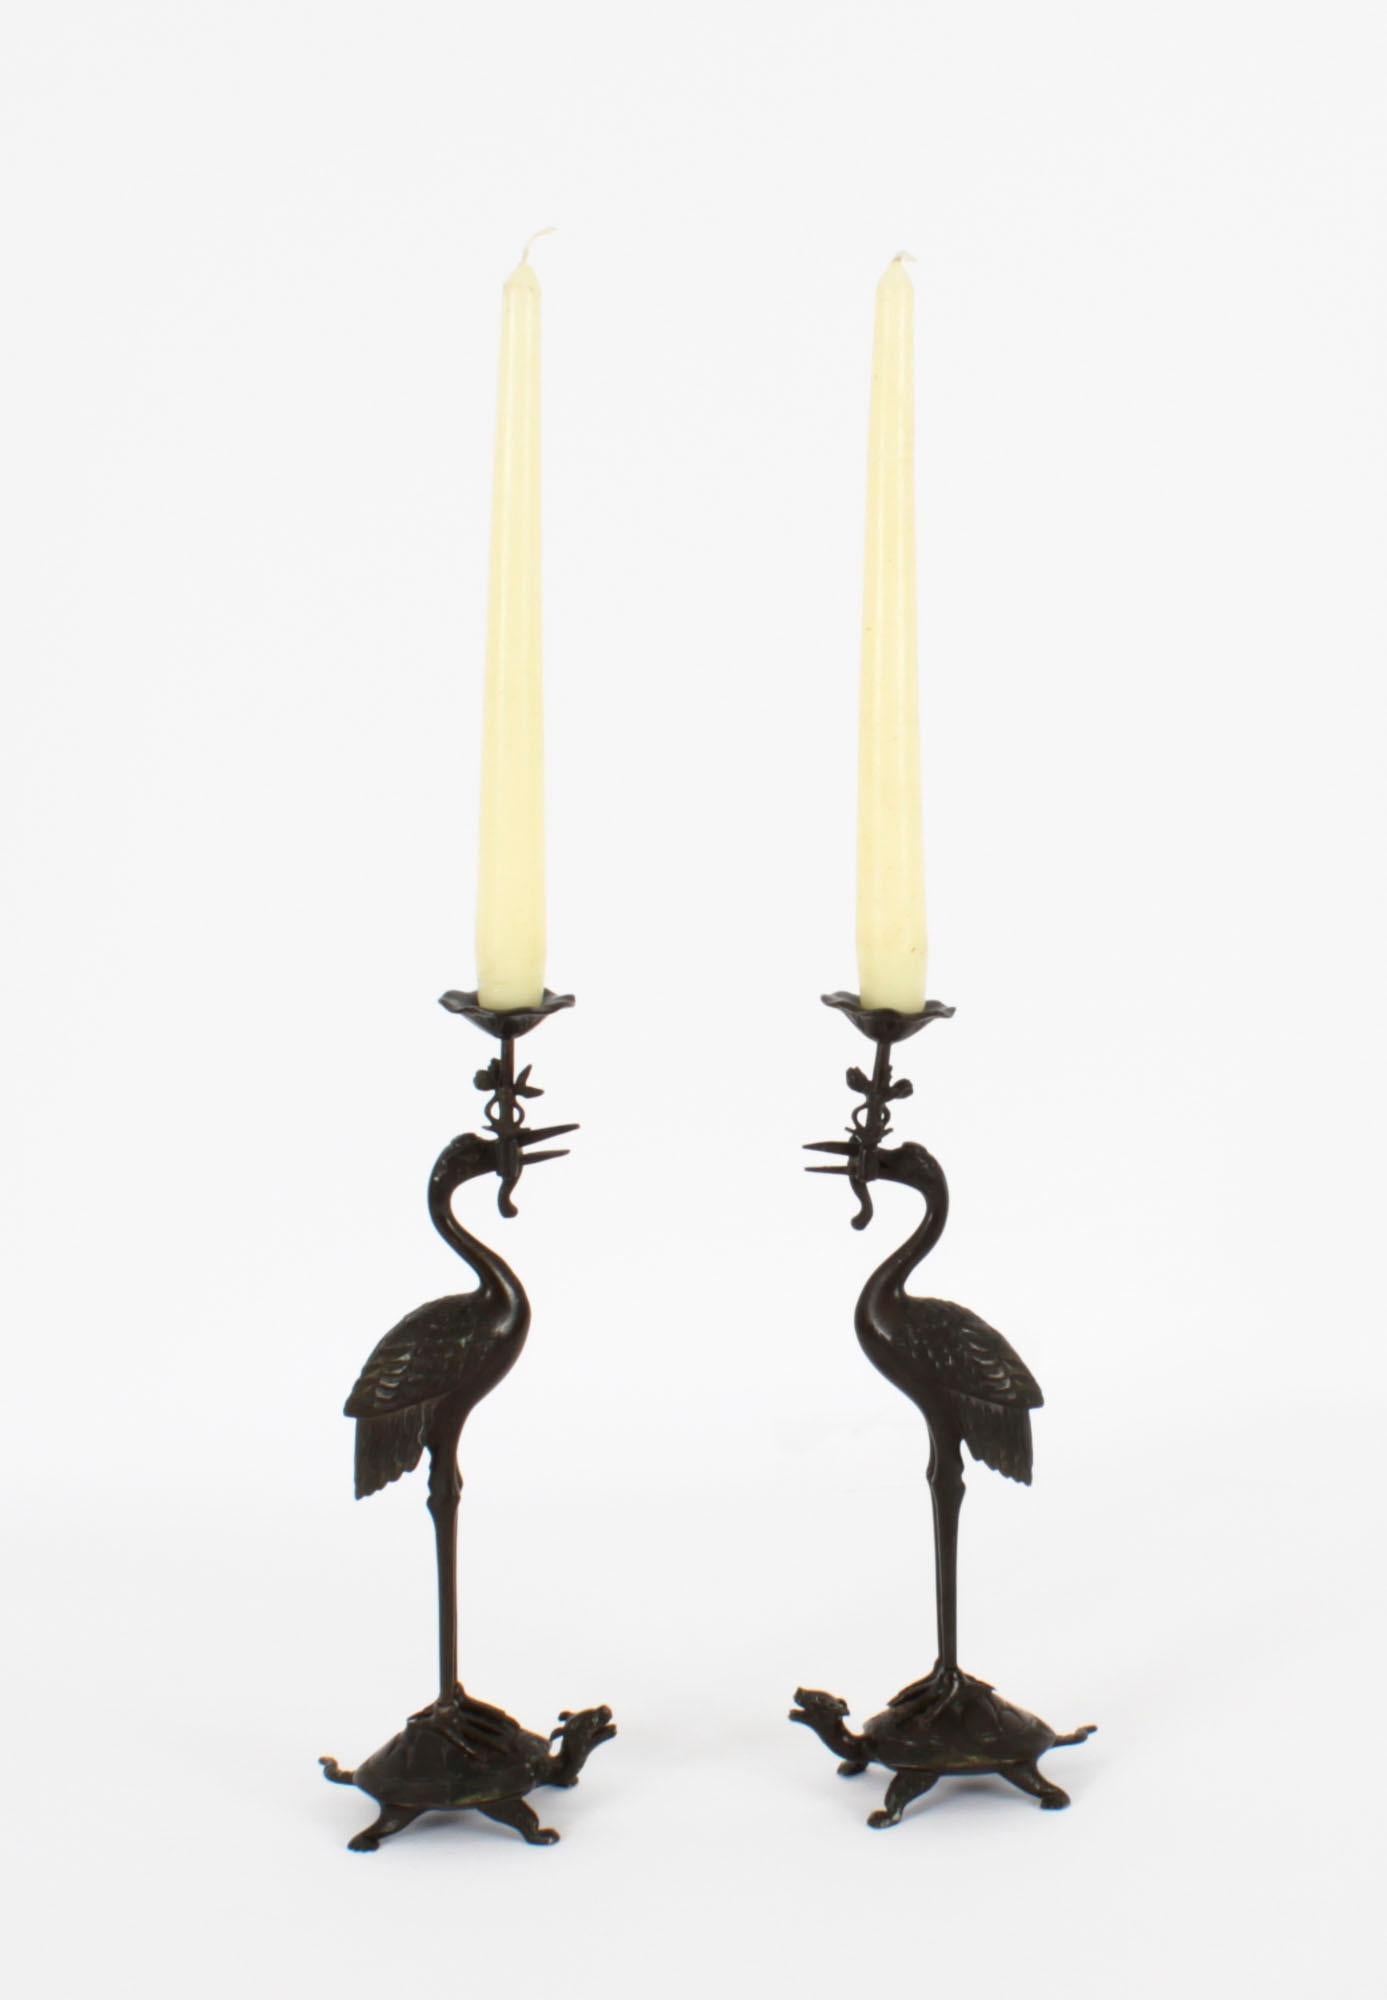 A delightful pair of Antique Japanese bronze stork figural pricket candlesticks, dating from the mid 19th Century.

There is no mistaking their unique quality and design, which is sure to be cherished by any admirer of Japanse artifacts.
